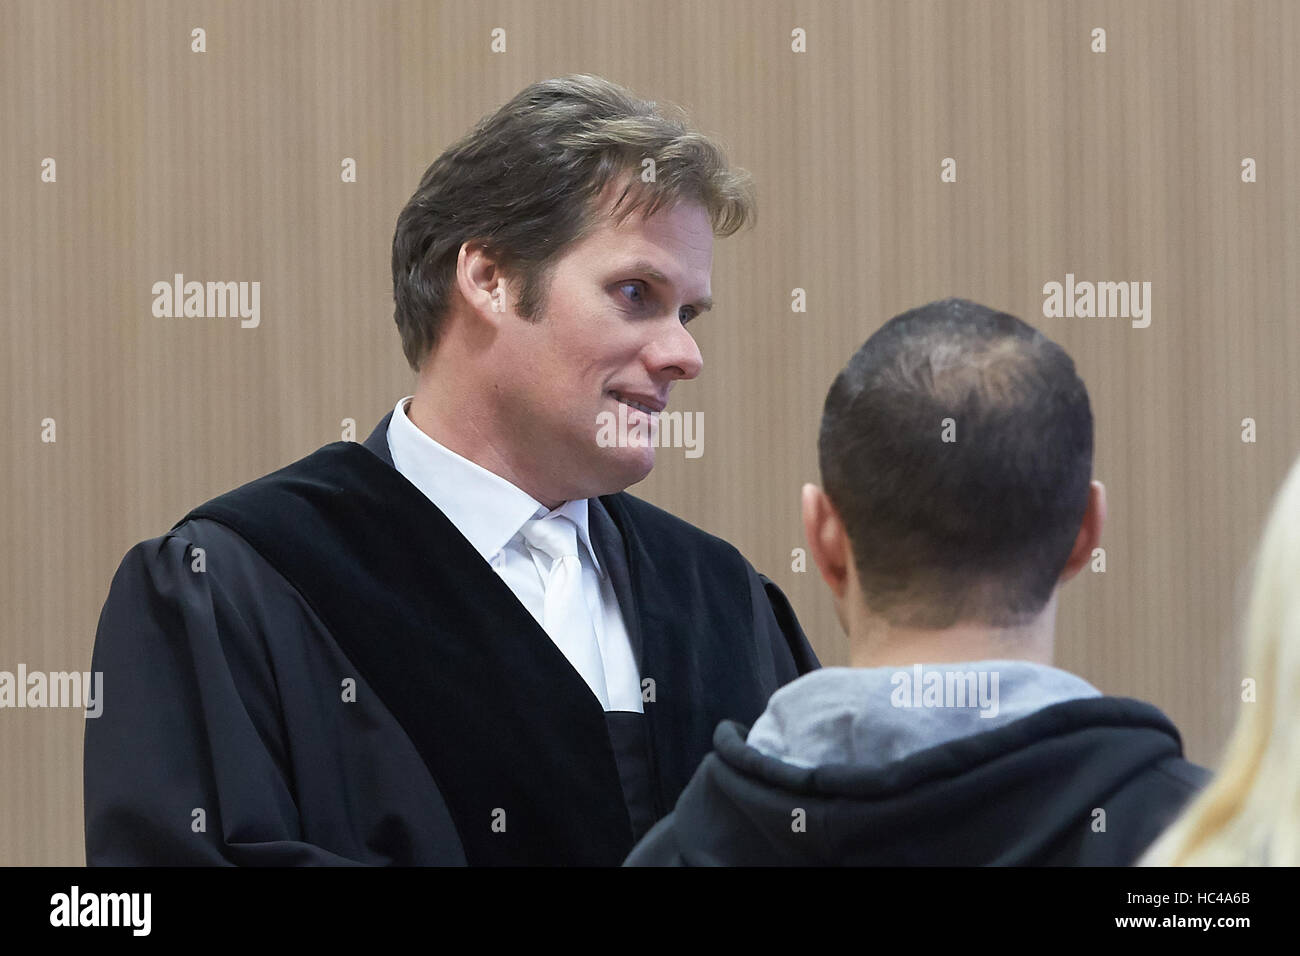 Koblenz, Germany. 8th Dec, 2016. Staatsanwalt (lit. state prosecutor) Matthias Teriet speaking with defendants before the start of the hearing in the case of territorial fights between rockers, at the regional court in Koblenz, Germany, 8 December 2016. Photo: Thomas Frey/dpa/Alamy Live News Stock Photo